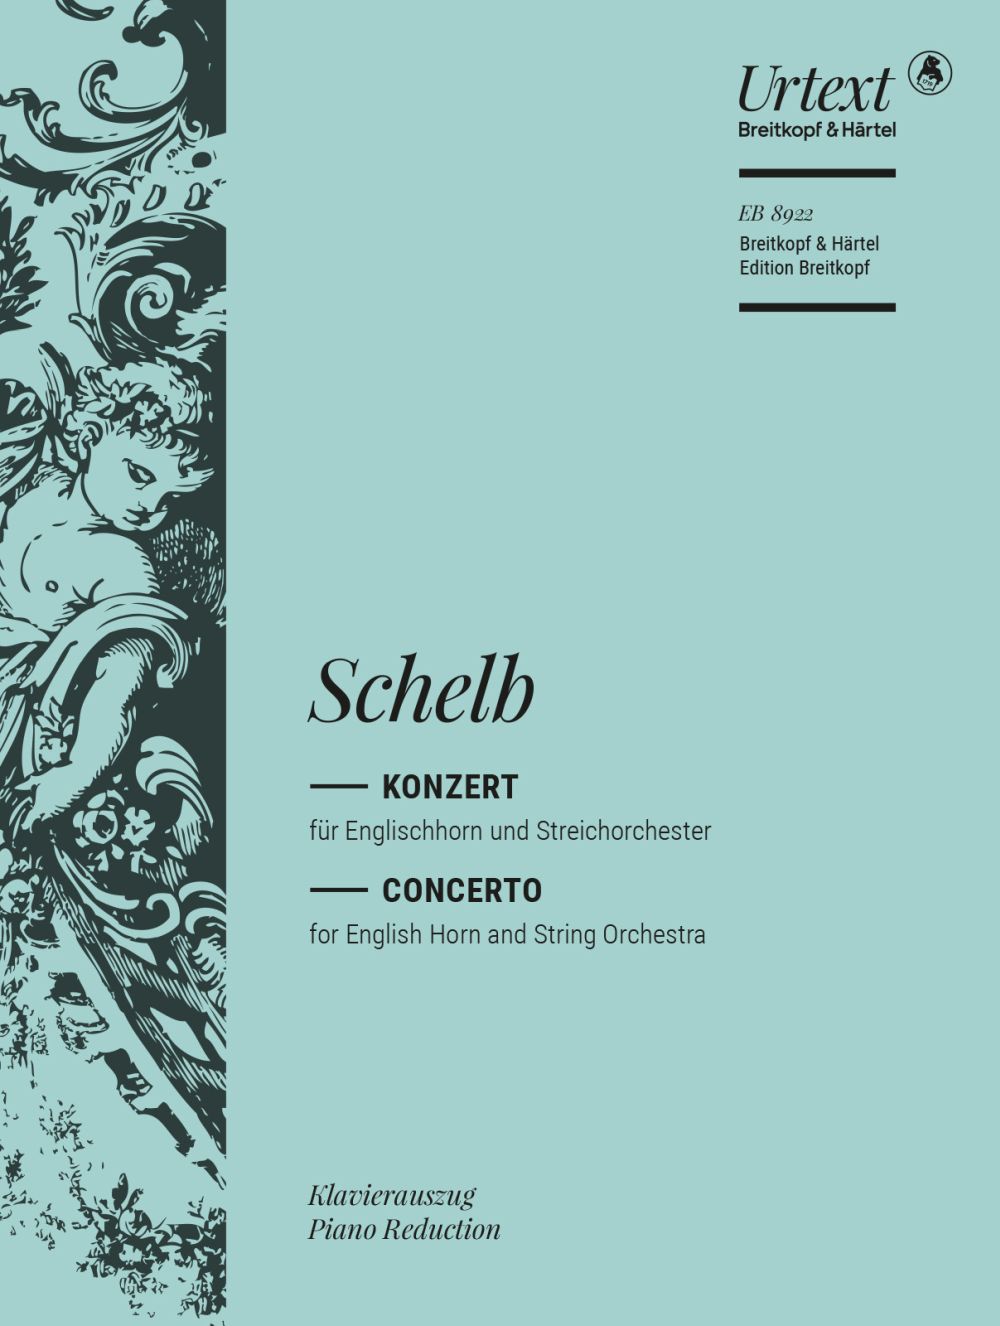 Schelb Concerto for English Horn and String Orchestra